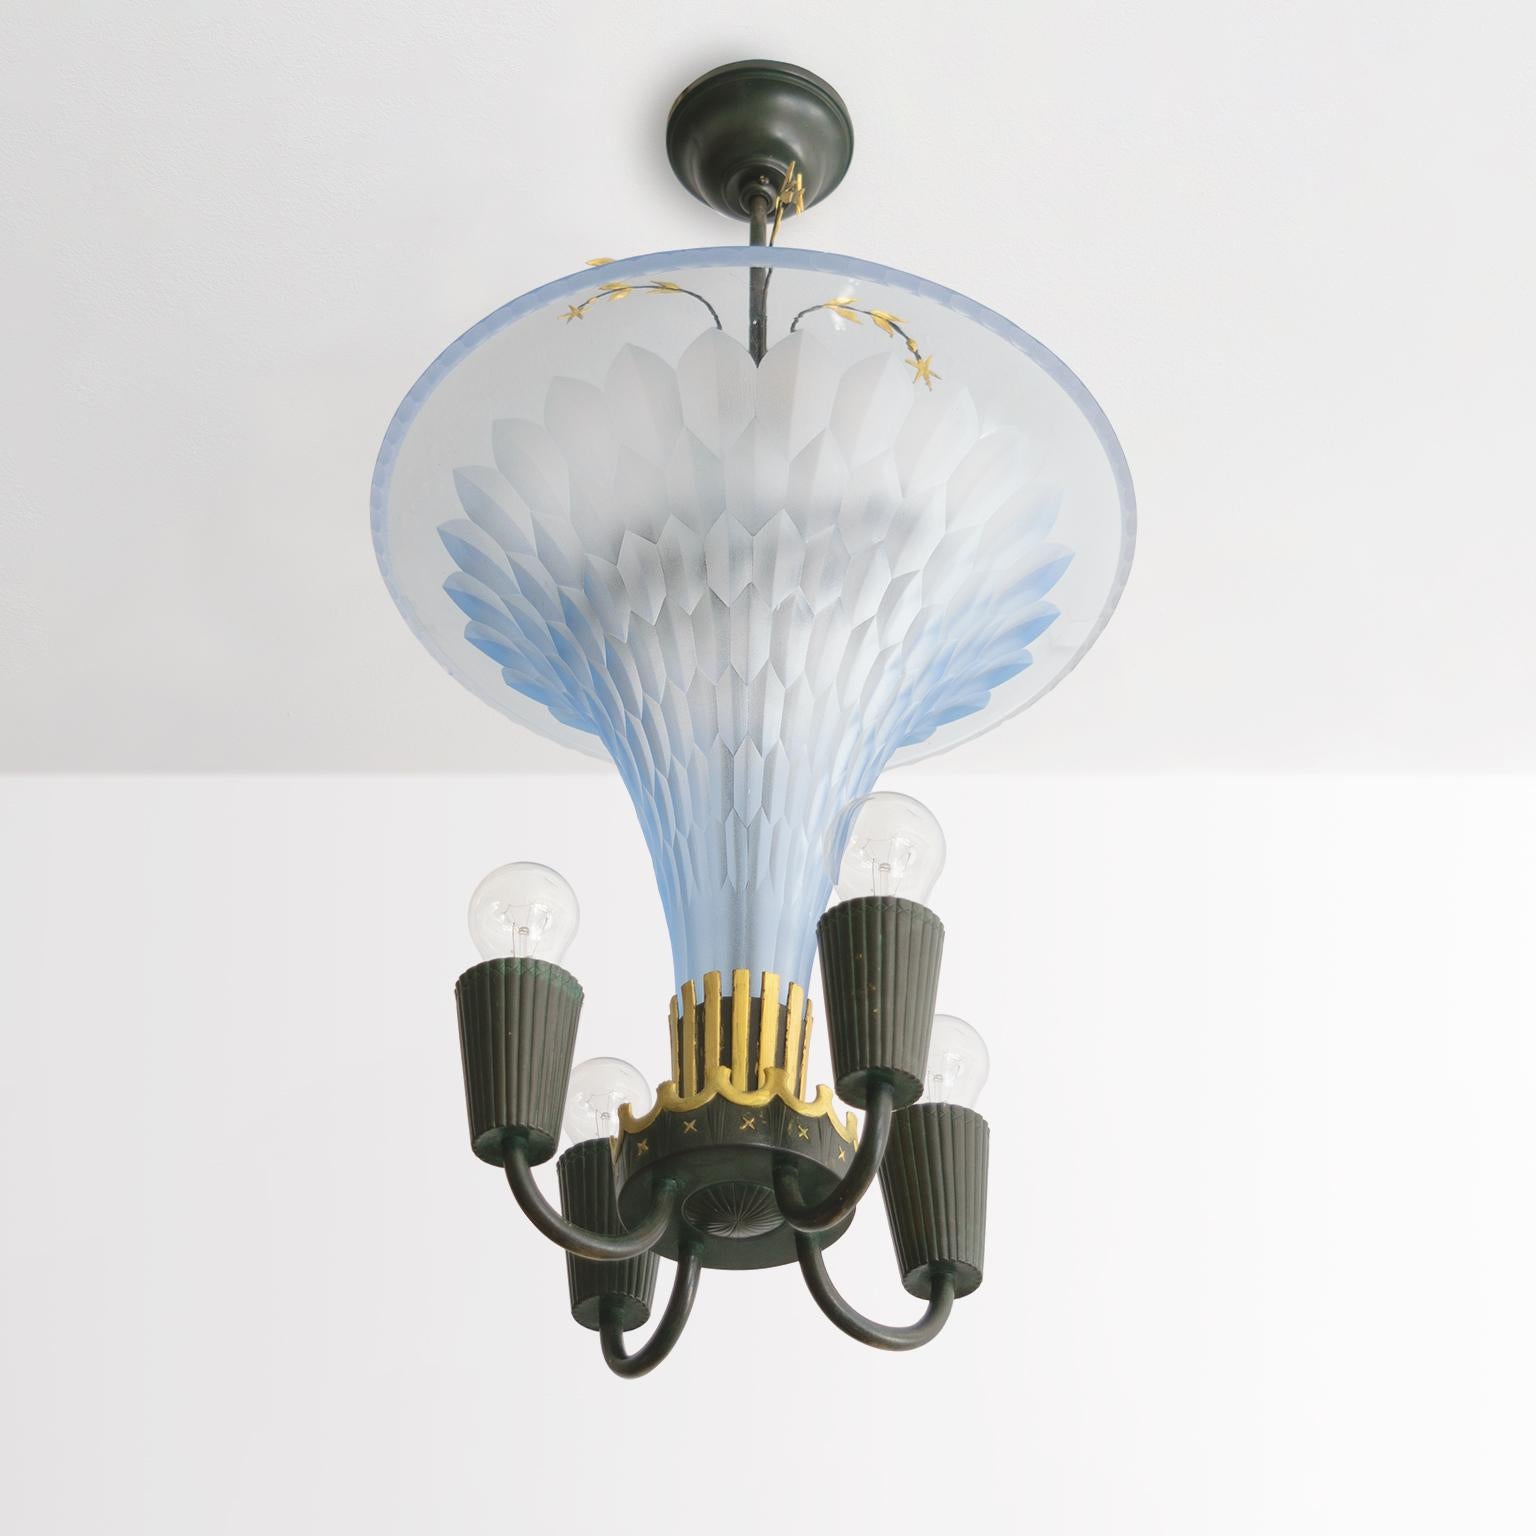 Swedish glass master Edward Hald designed this chandelier with Erik Tidstrand for Orrefors in the late 1920’s. The etched blue glass funnel rises from a patinated and golden ribbed holder which in turn sits within a finely detailed crown. Besides